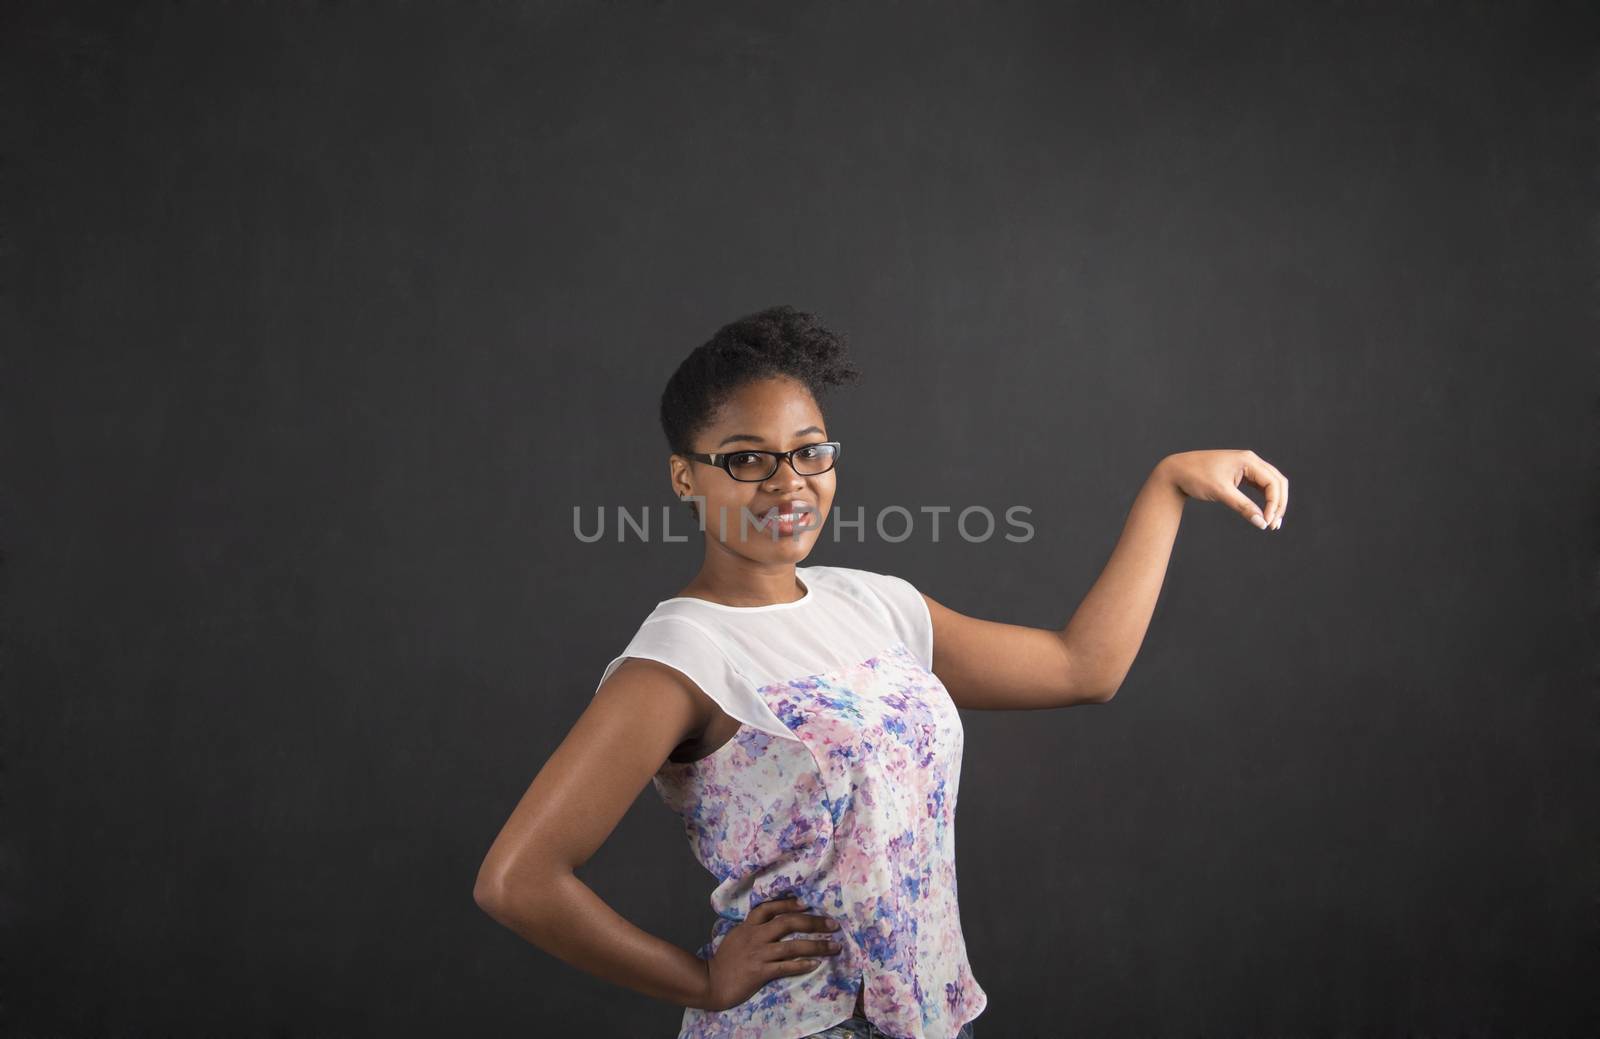 South African or African American black woman teacher or student holding an object out to her side standing against a chalk blackboard background inside